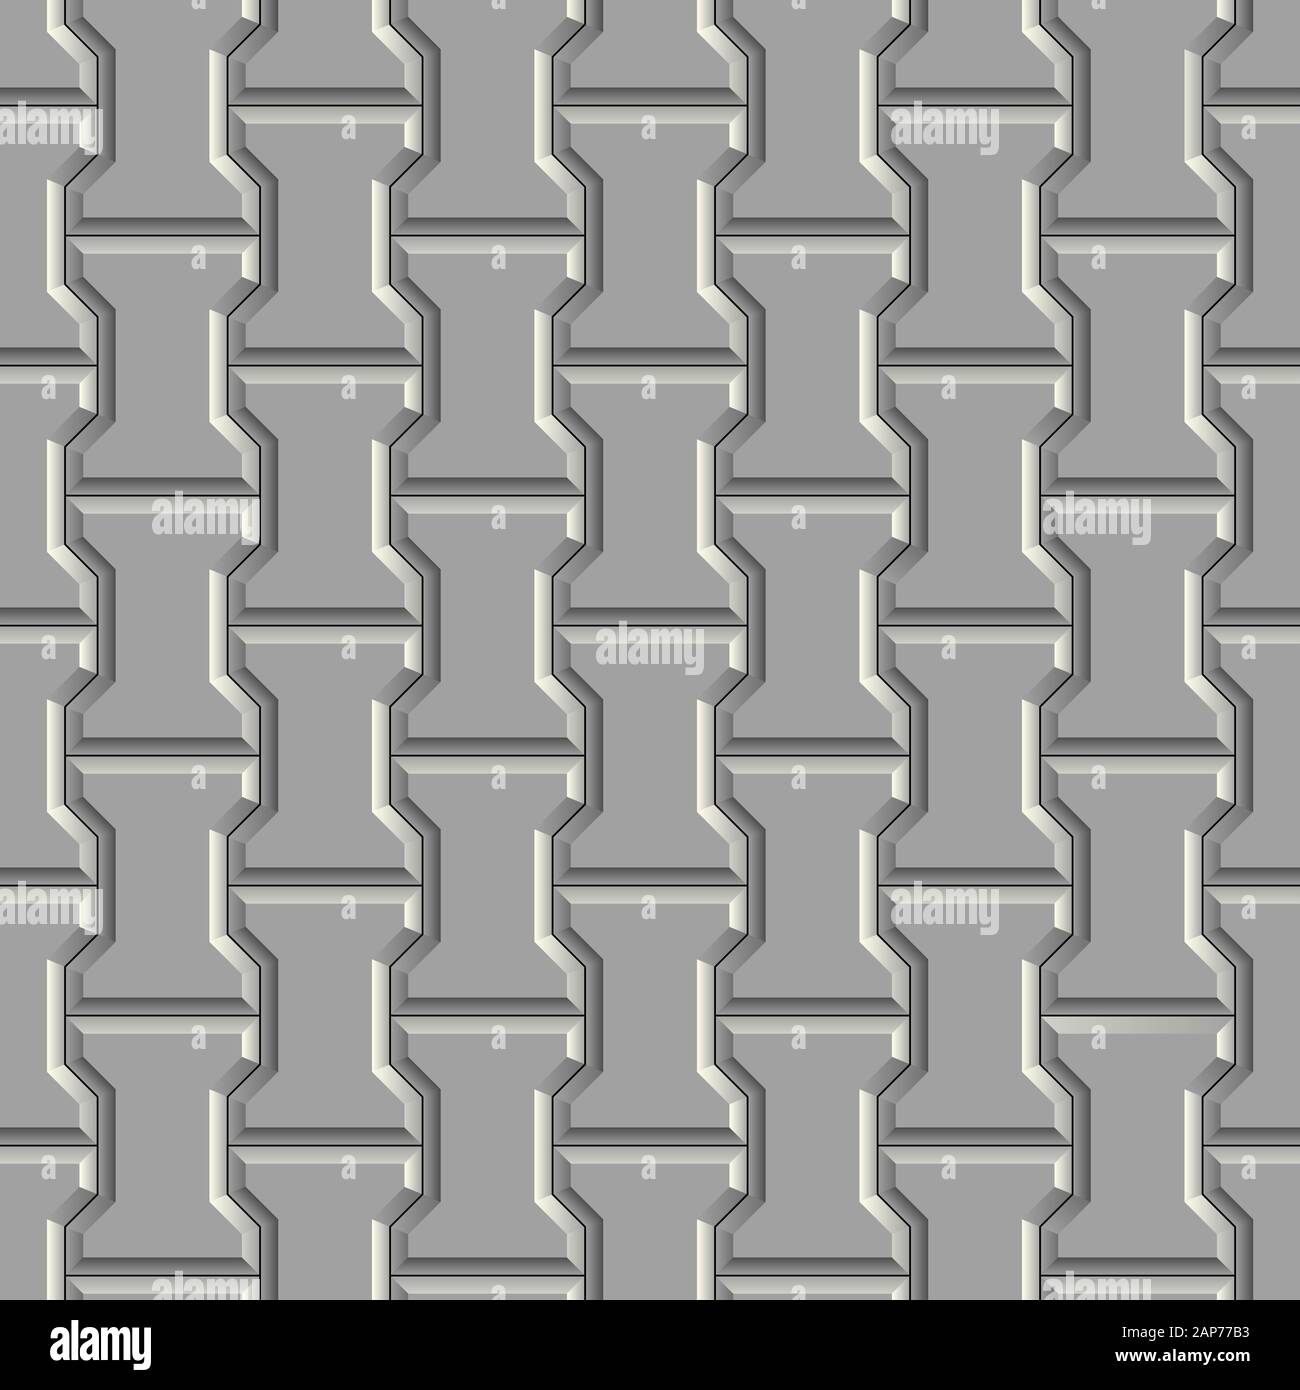 Seamless pattern of gray concrete pavement. 3D repeating pattern of street paving tiles Stock Photo